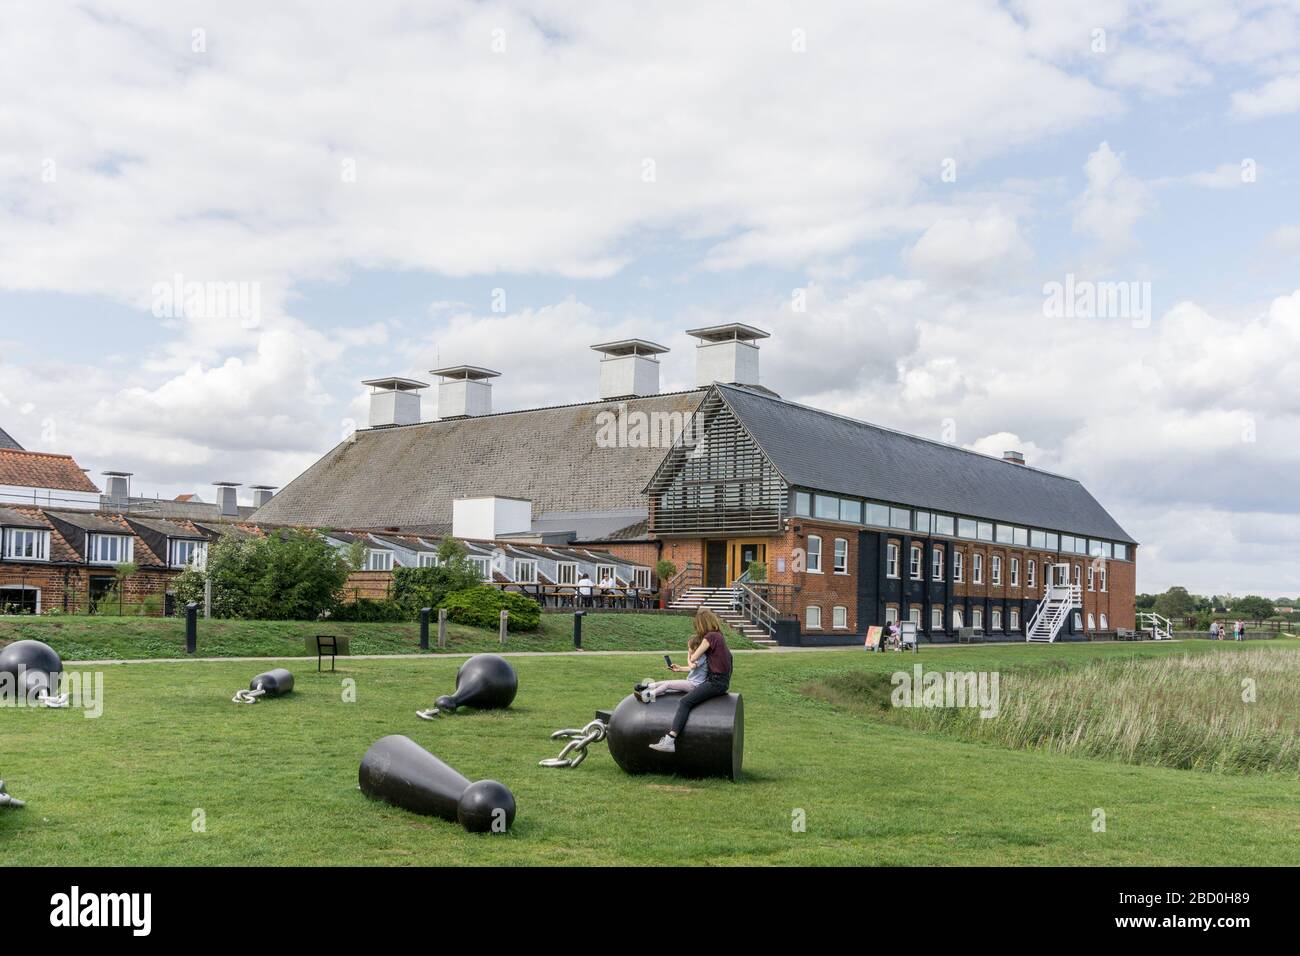 The concert hall at Snape Maltings, Suffolk, UK; modern art installation in the foreground Stock Photo